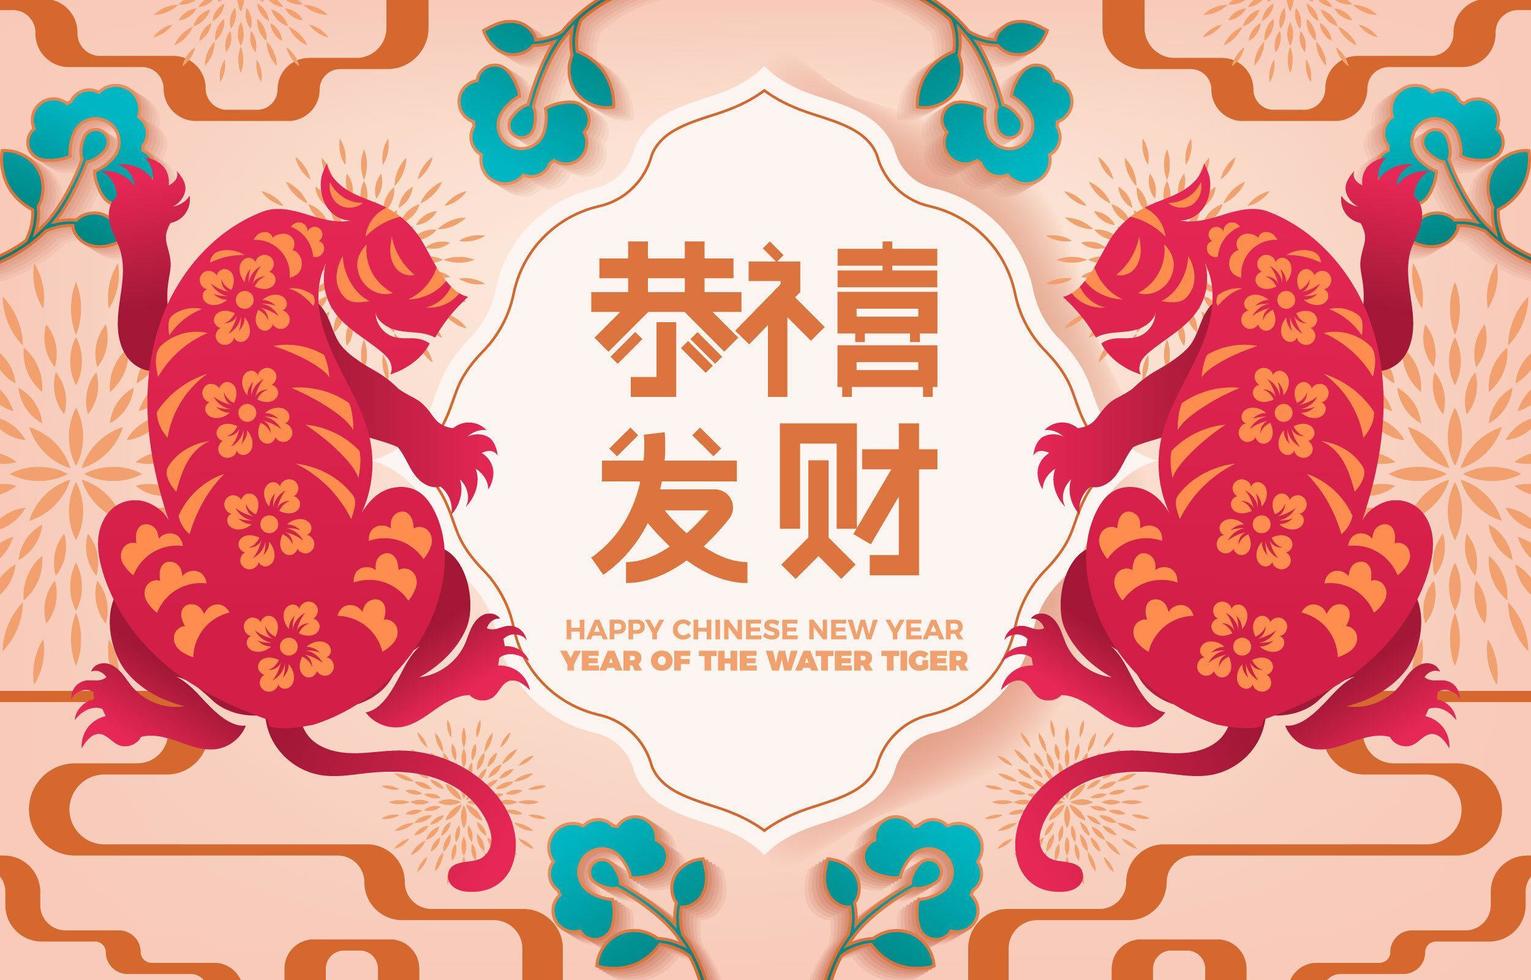 Chinese New Year Background Concept vector